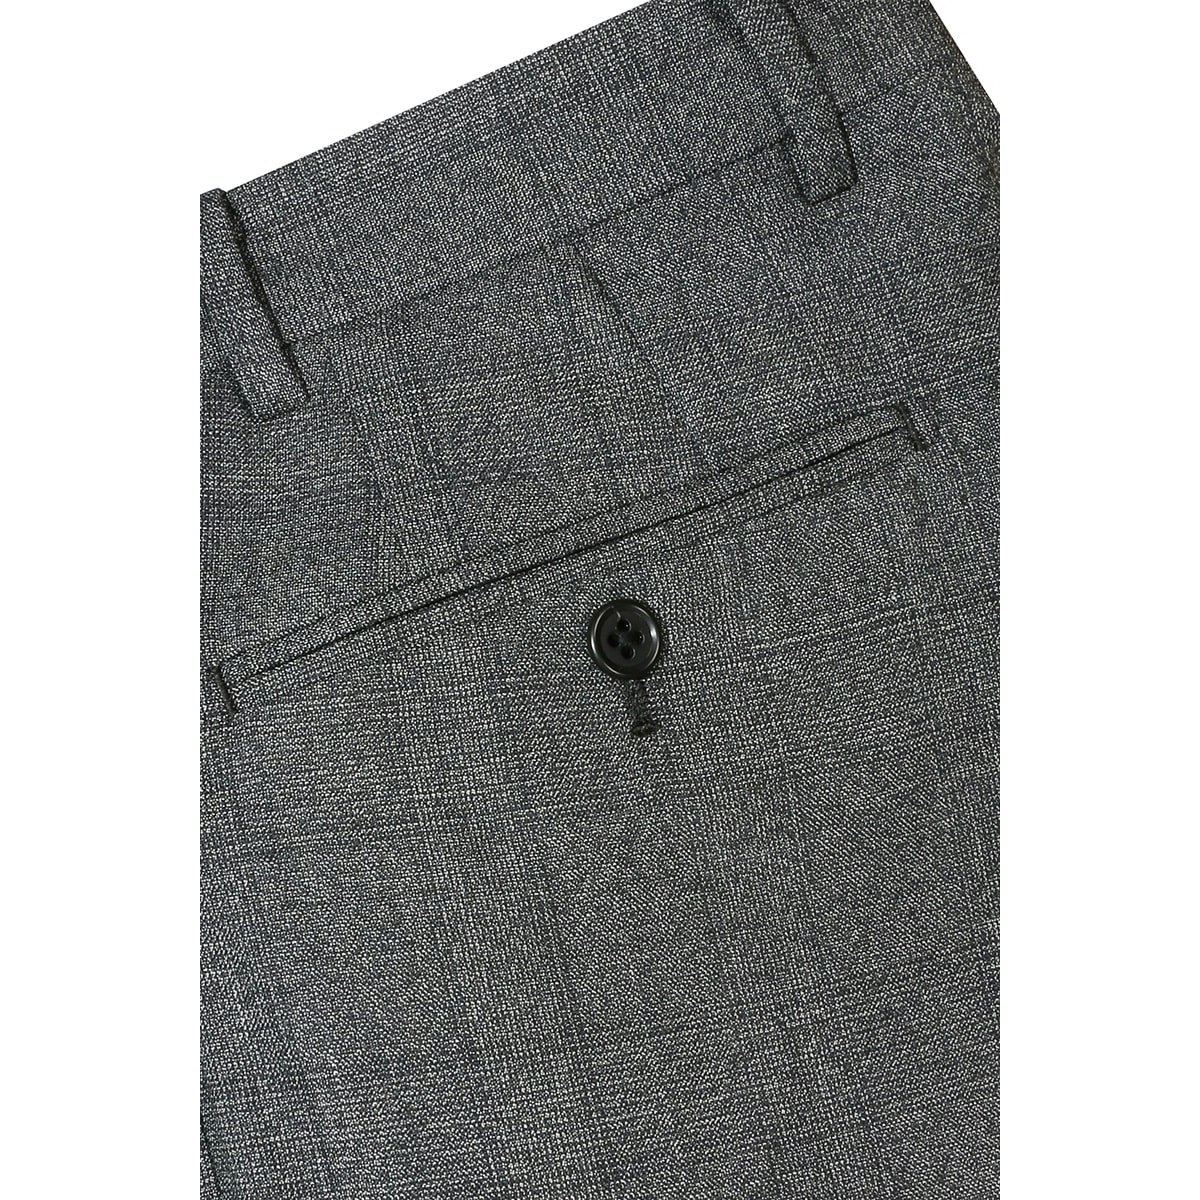 InStitchu Collection Freehill Charcoal Glen Plaid Wool Pants